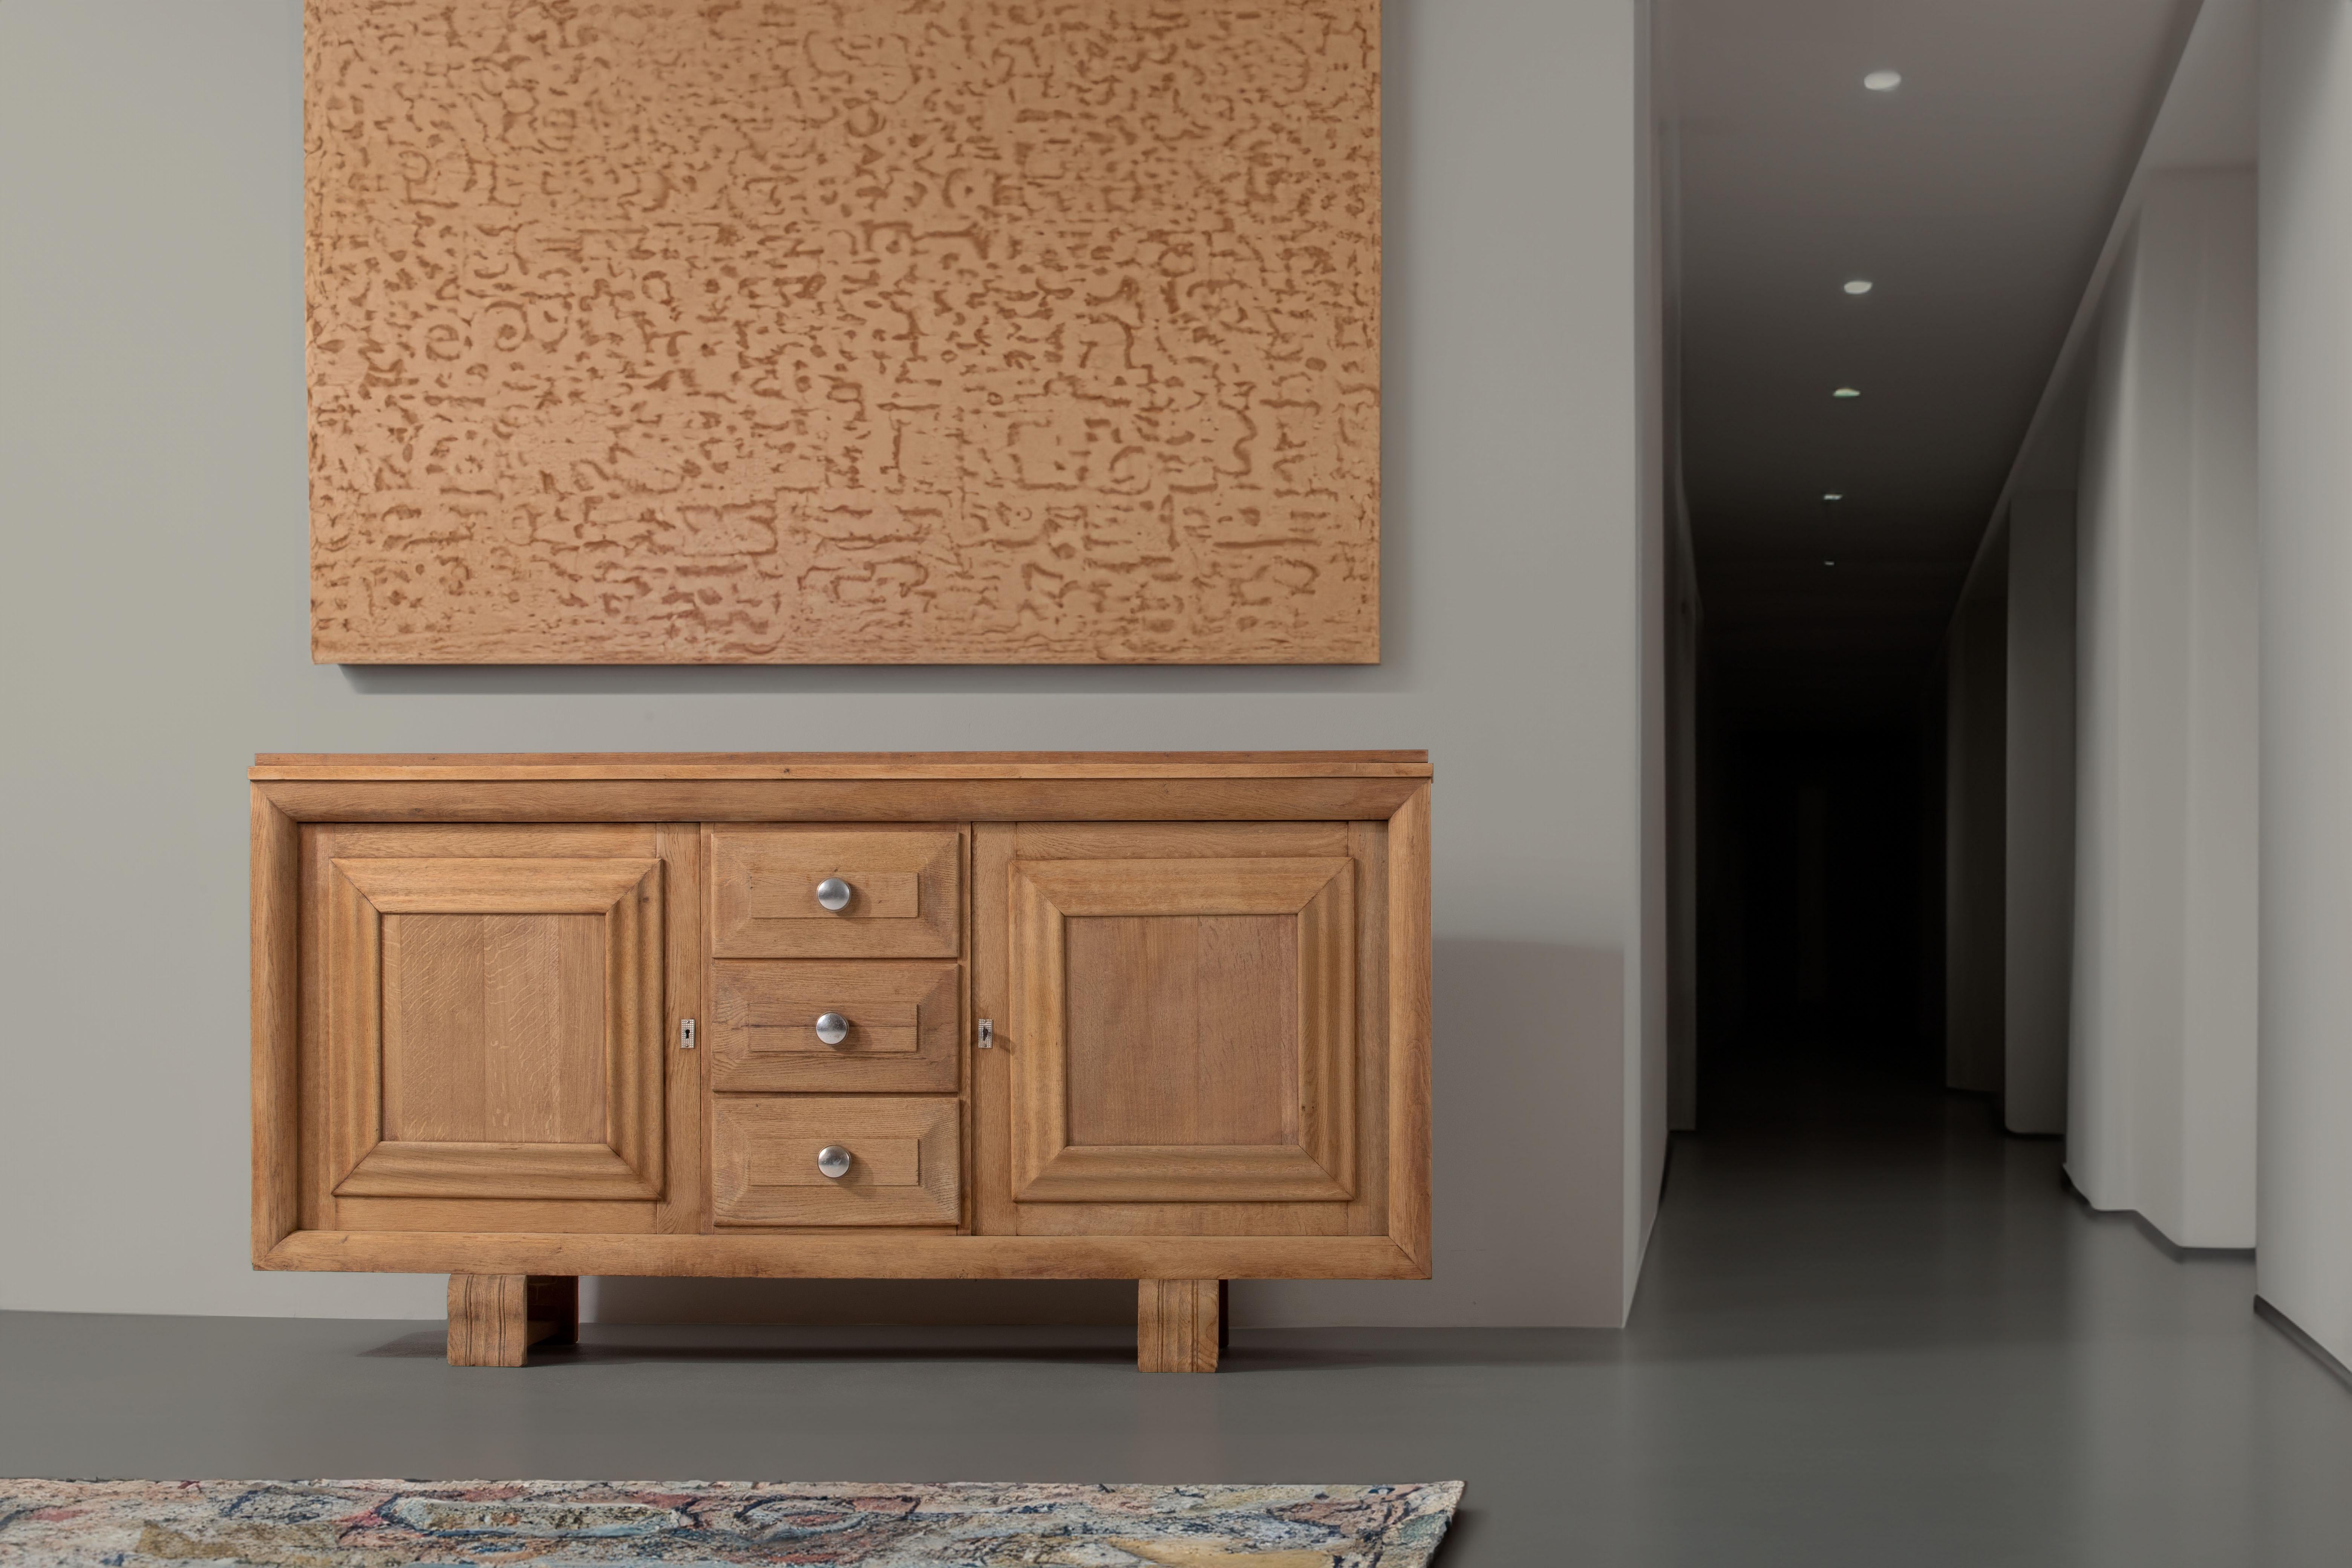 Introducing an exquisite Art Deco buffet in natural oak, crafted in the style of the renowned French furniture designer, Charles Dudouyt. Dudouyt's work is celebrated for its exceptional craftsmanship, innovative designs, and seamless blend of